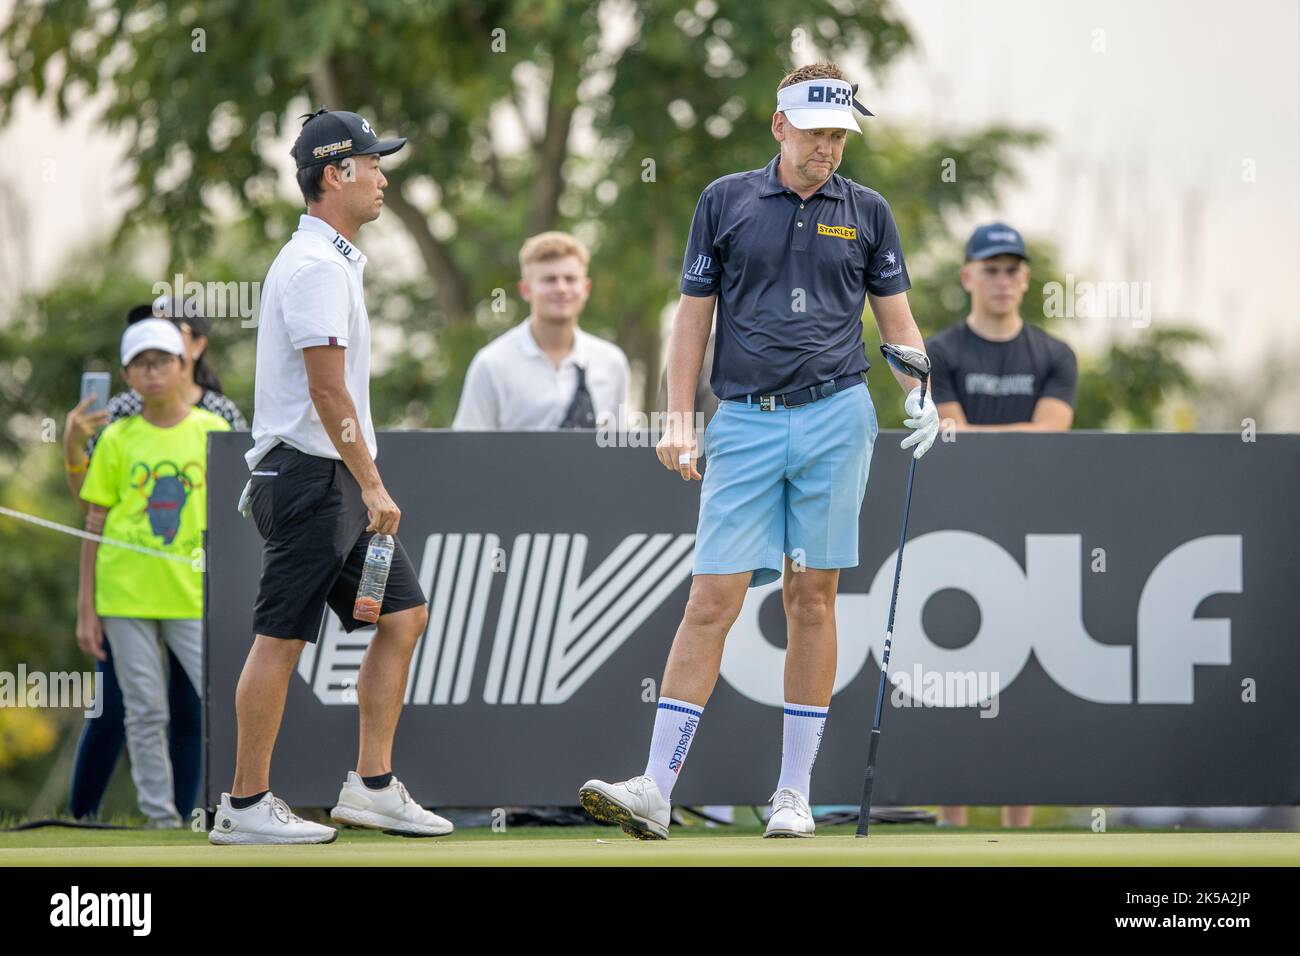 BANGKOK, THAILAND - OCTOBER 7: Ian Poulter of England on hole 8 during the first round at the LIV GOLF INVITATIONAL BANGKOK at Stonehill Golf Course on October 7, 2022 in Bangkok, THAILAND (Photo by Peter van der Klooster/Alamy Live News) Stock Photo